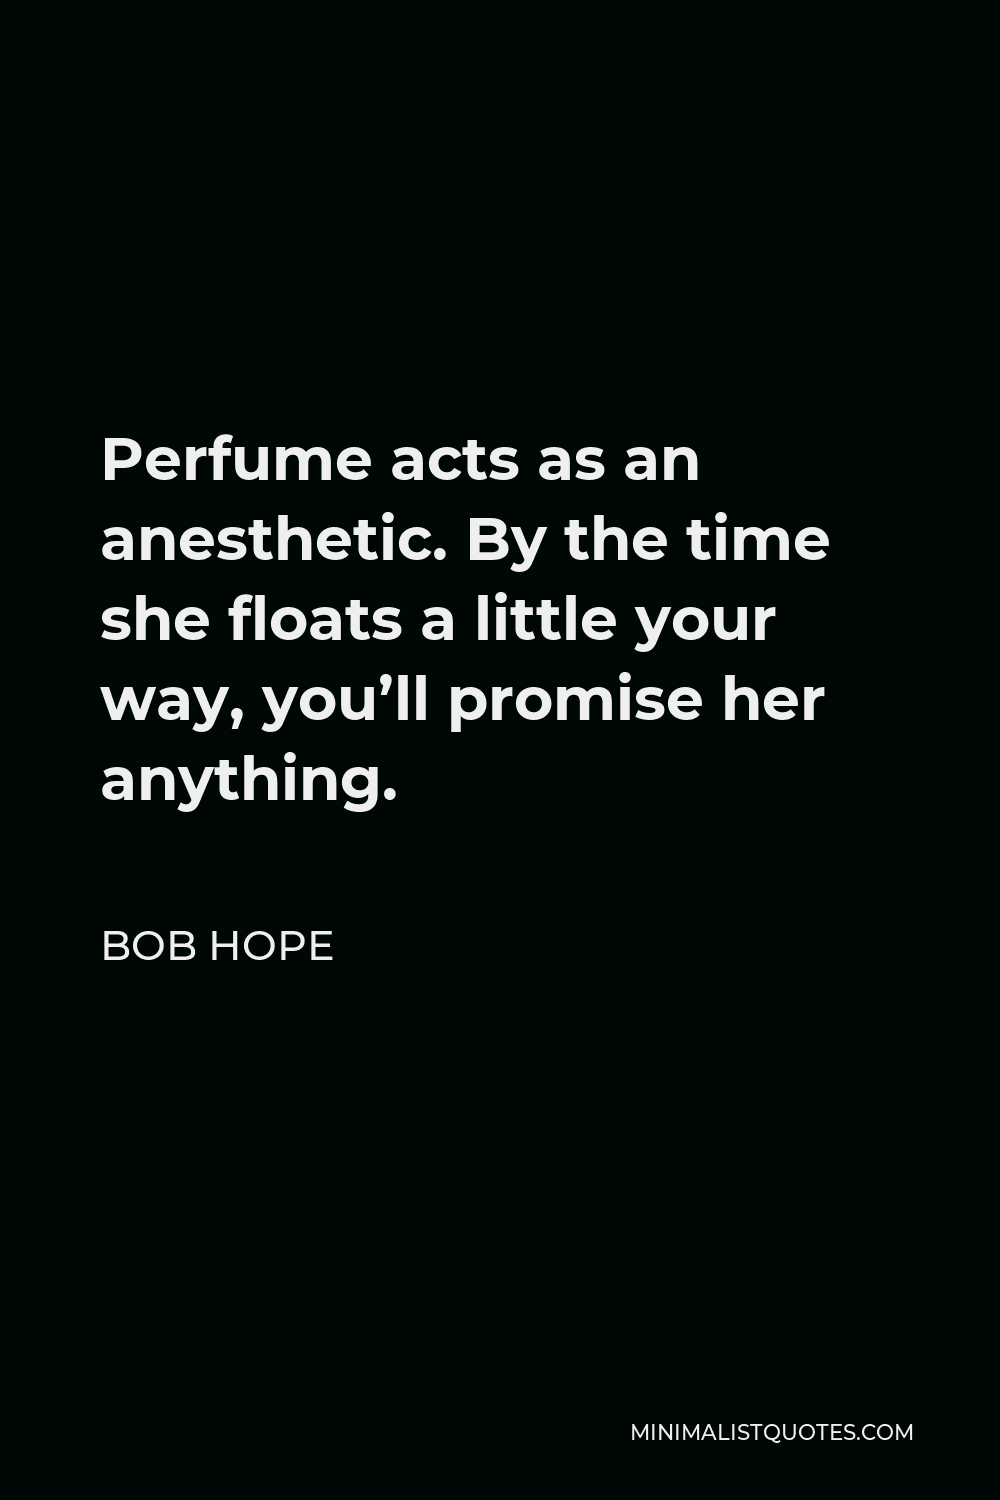 Bob Hope Quote - Perfume acts as an anesthetic. By the time she floats a little your way, you’ll promise her anything.